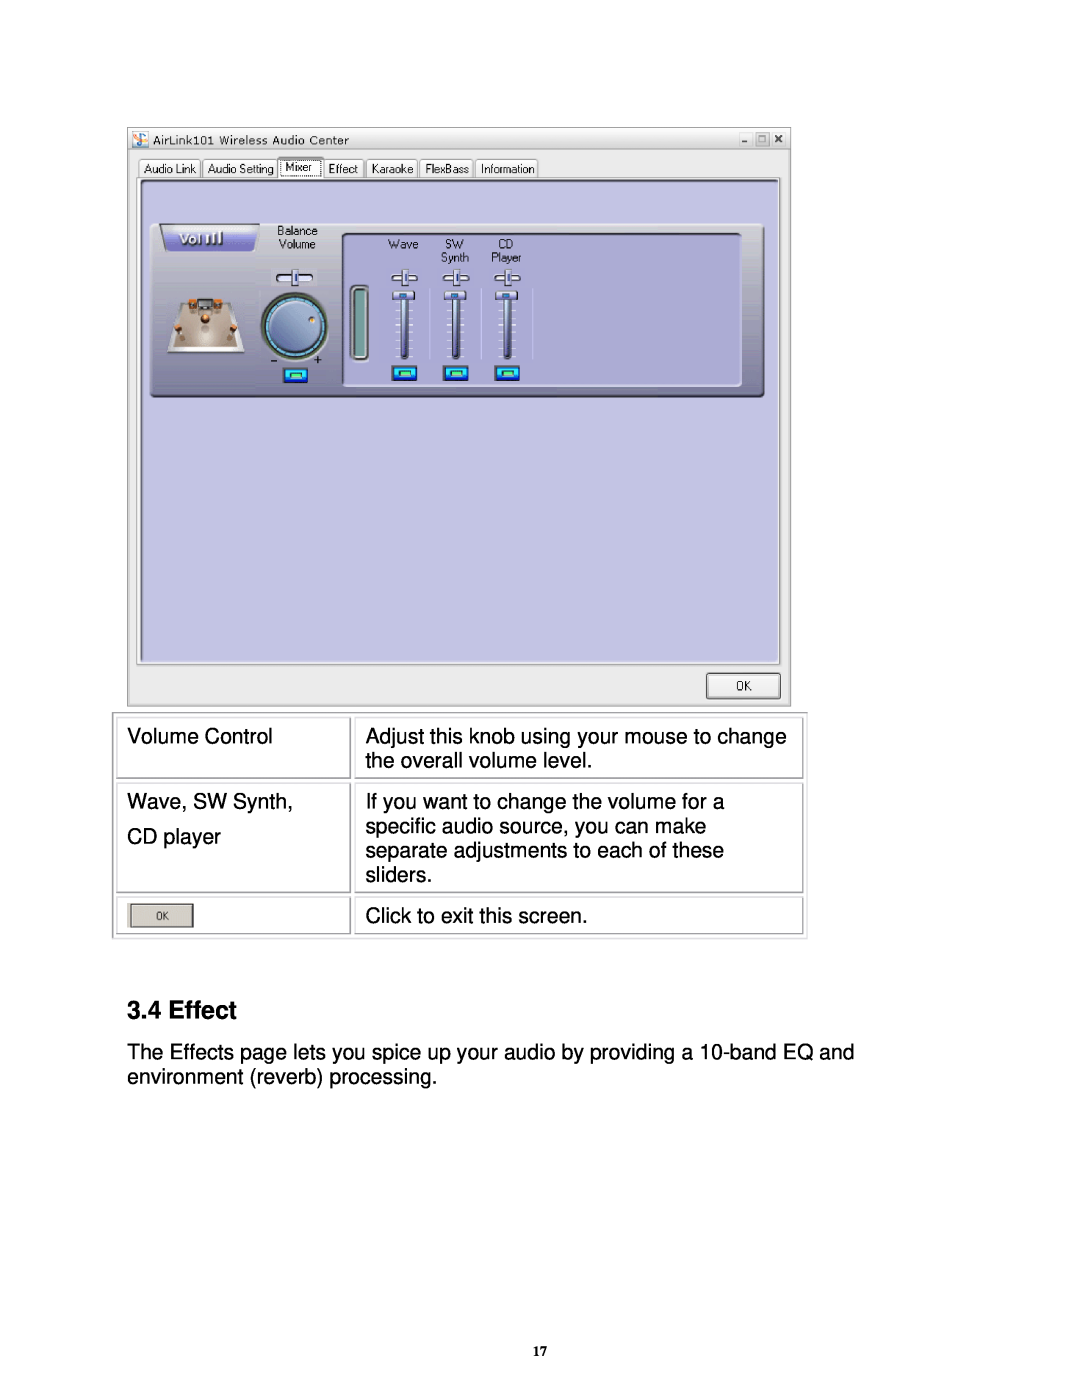 Airlink101 AWMB100 manual Effect, Volume Control Wave, SW Synth, CD player, Click to exit this screen 